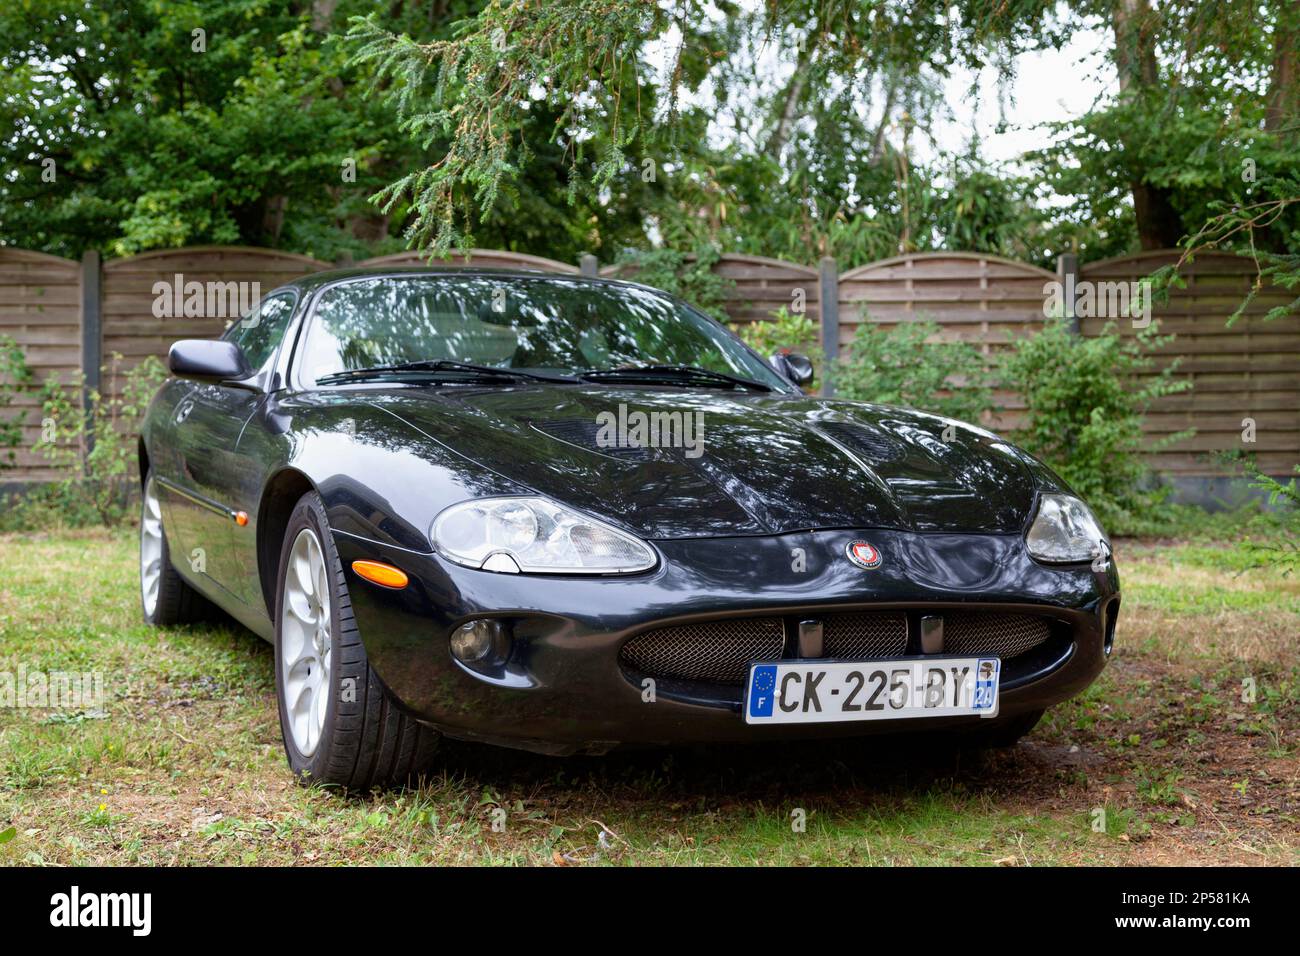 Lamorlaye, France - July 05 2020: The Jaguar XKR is a grand tourer manufactured and marketed by British automobile manufacturer Jaguar Cars. Stock Photo